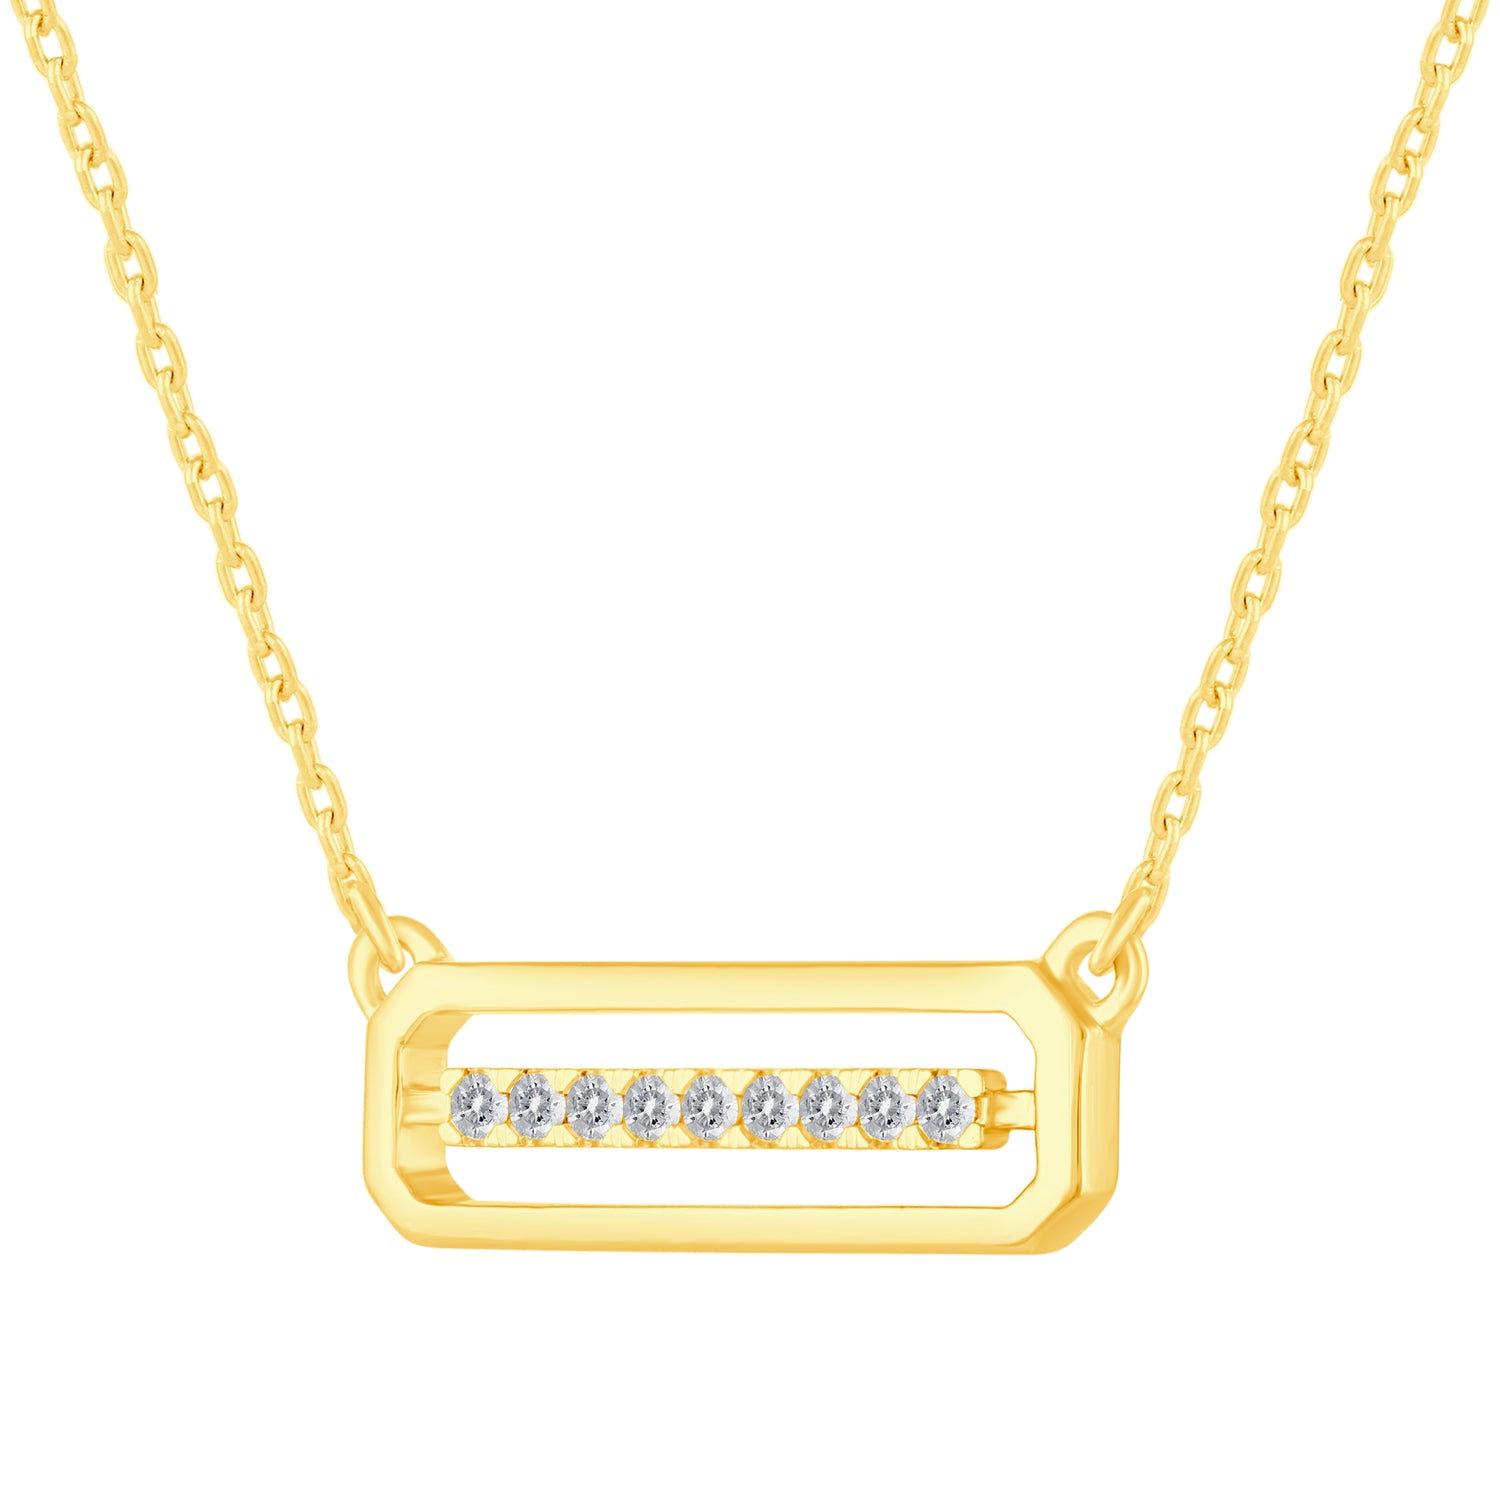 1/10 Cttw Diamond Open Bar Rectangle Pendant Necklace set in 925 Sterling Silver Yellow Gold Plating